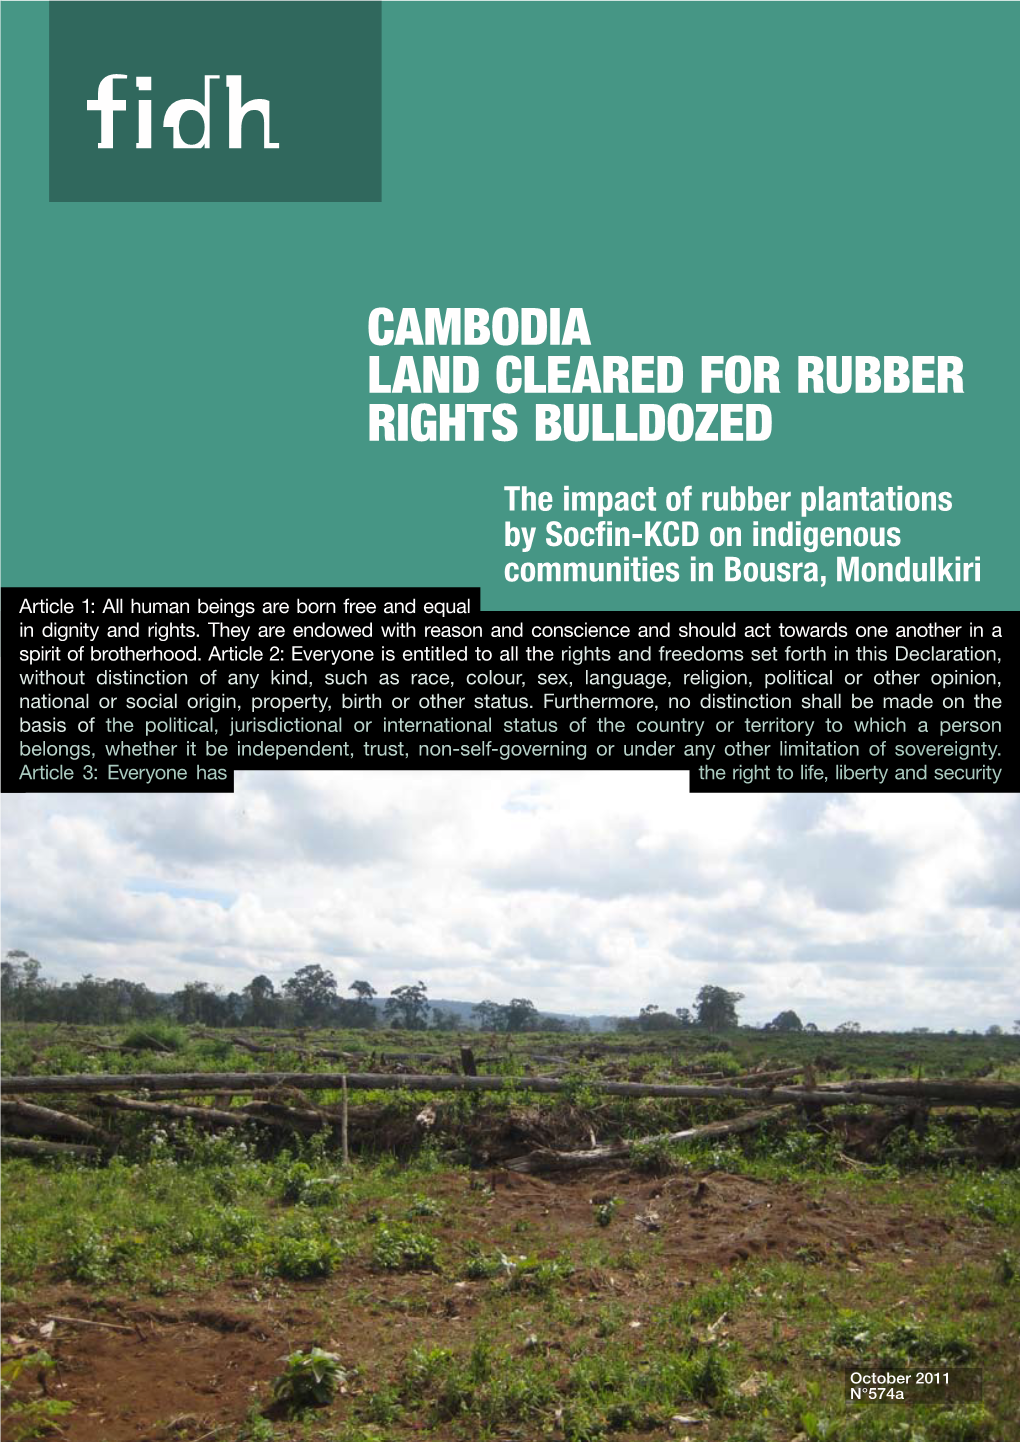 Cambodia Land Cleared for Rubber Rights Bulldozed the Impact of Rubber Plantations by Socfin-KCD on Indigenous Communities in Bousra, Mondulkiri of Person